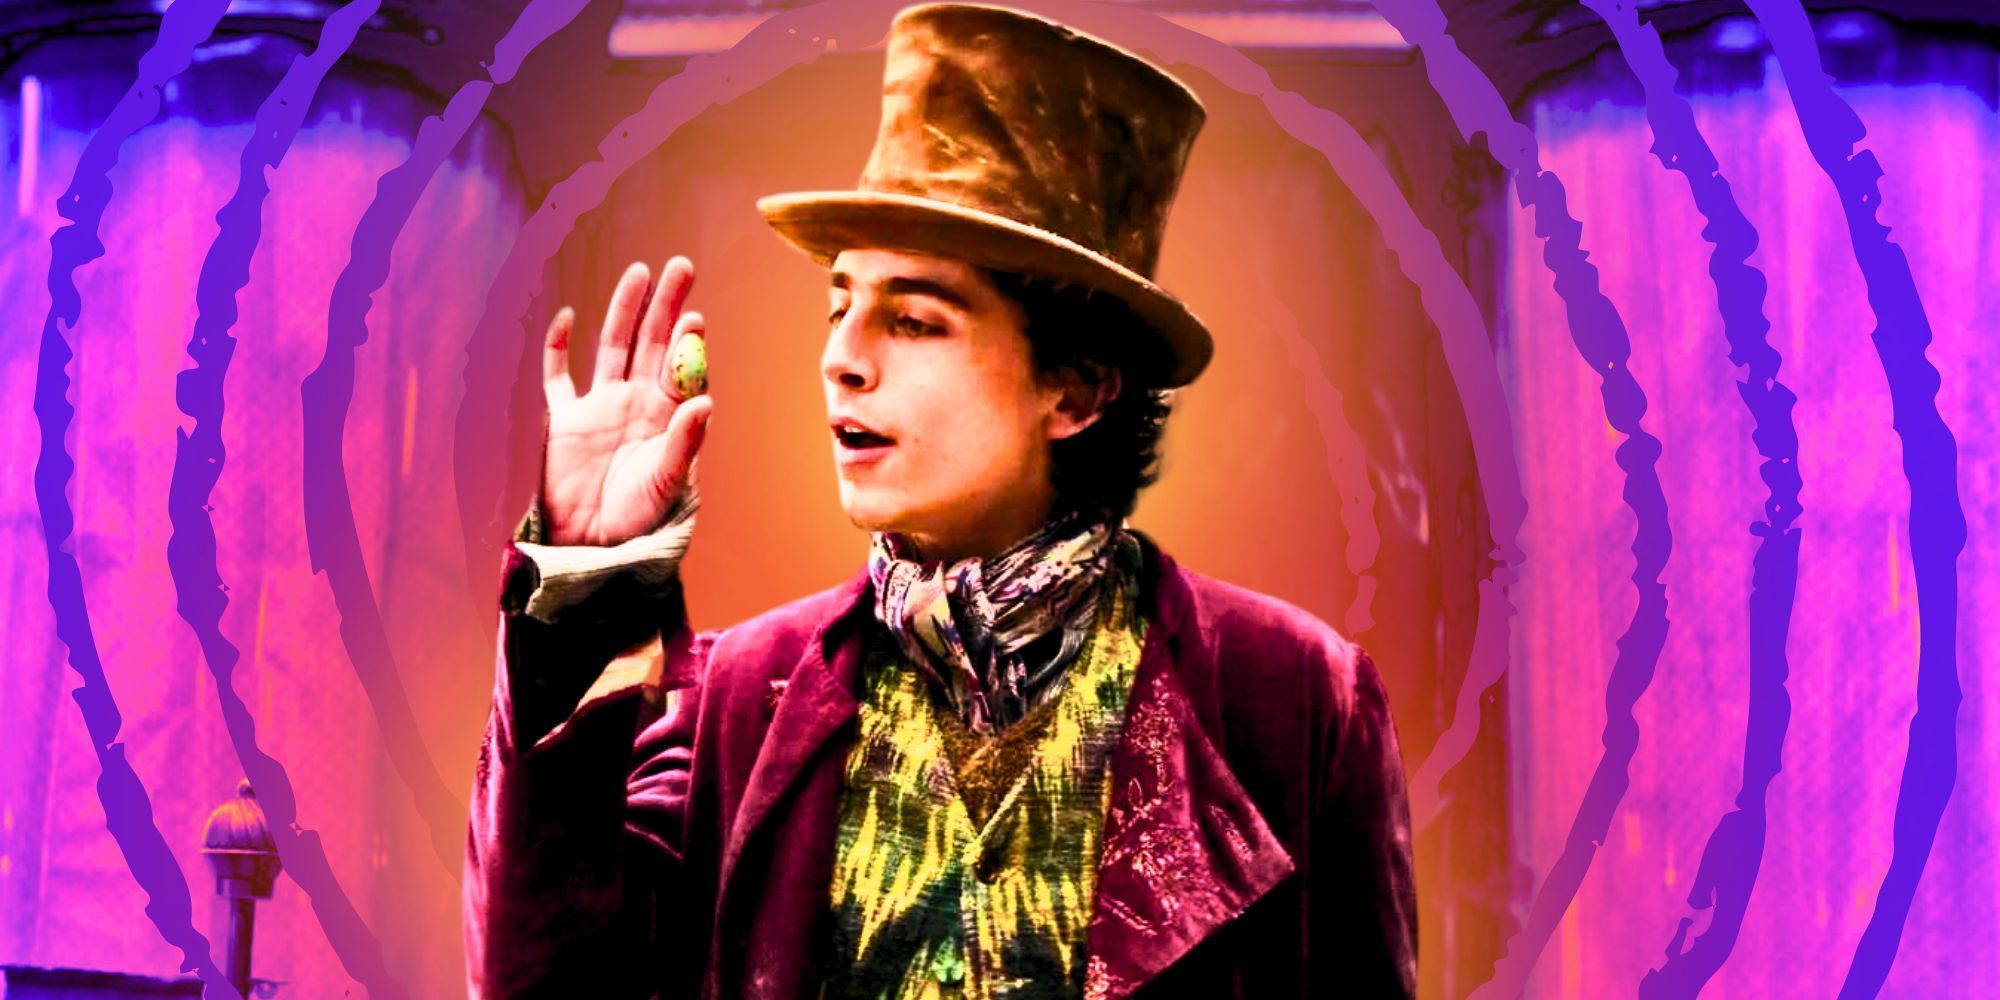 Custom image of Timothée Chalamet as Willy Wonka looking at a piece of chocolate in his hand